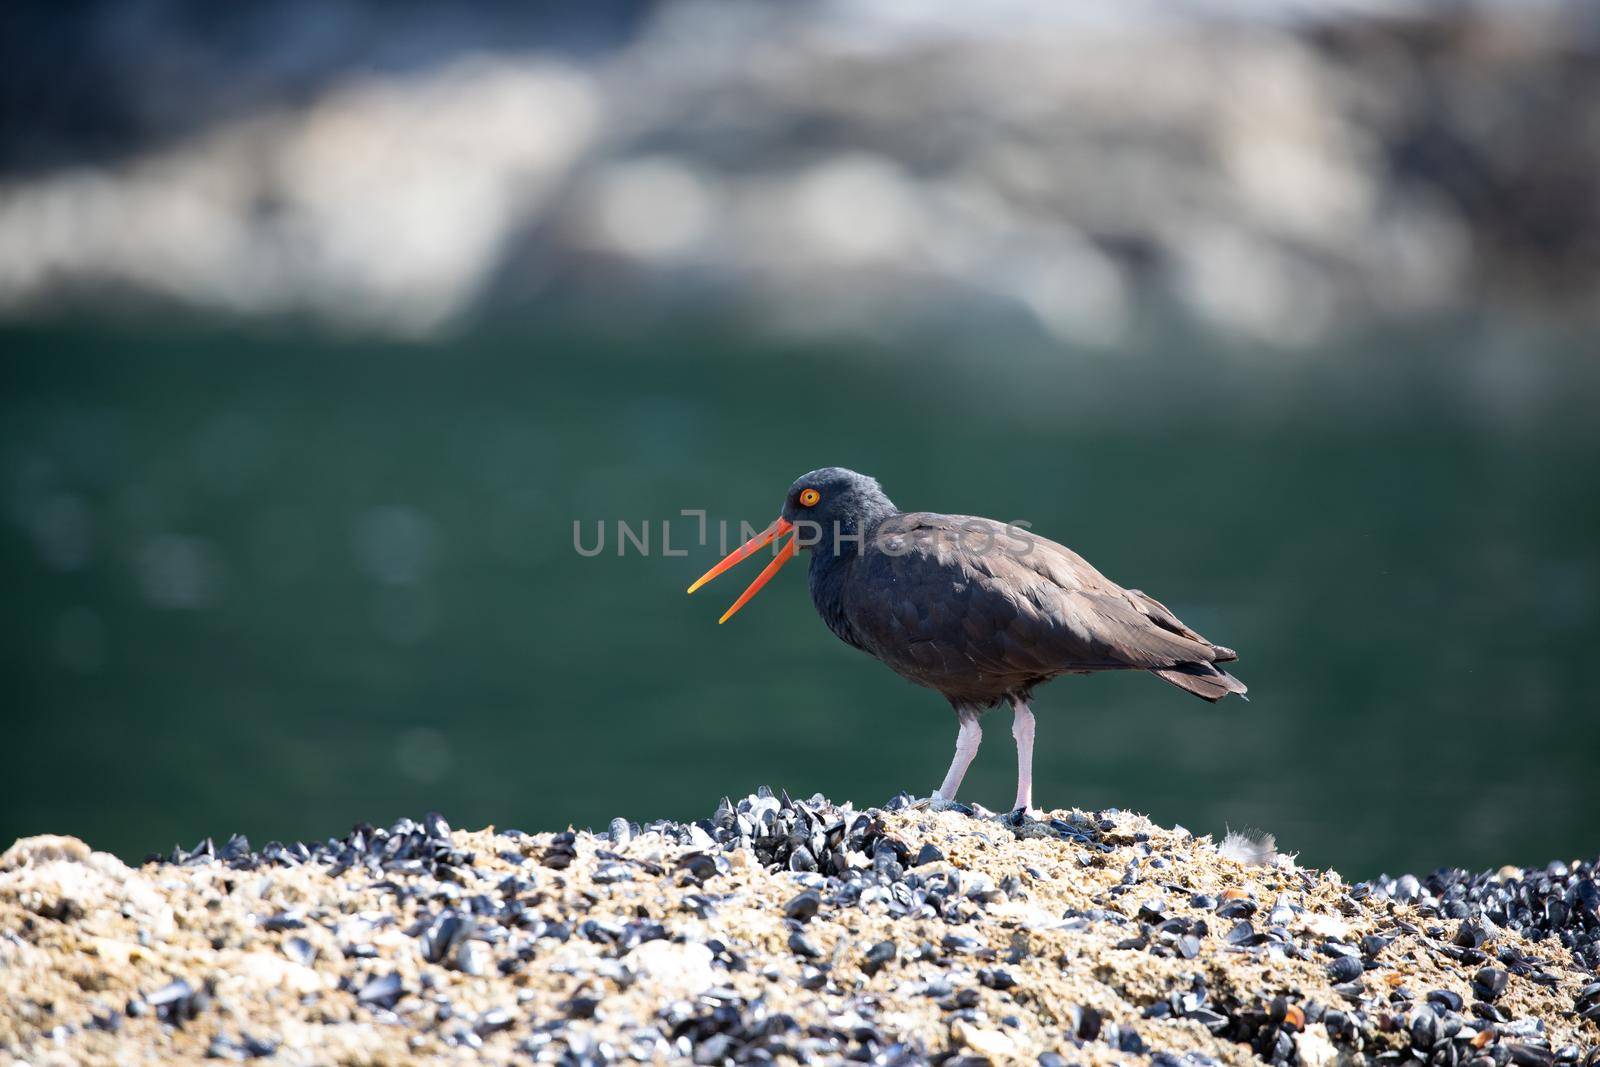 Black Oystercatcher with open beak and walking on a shell covered rock with water in the background, near Ballet Bay, Sunshine Coast, British Columbia